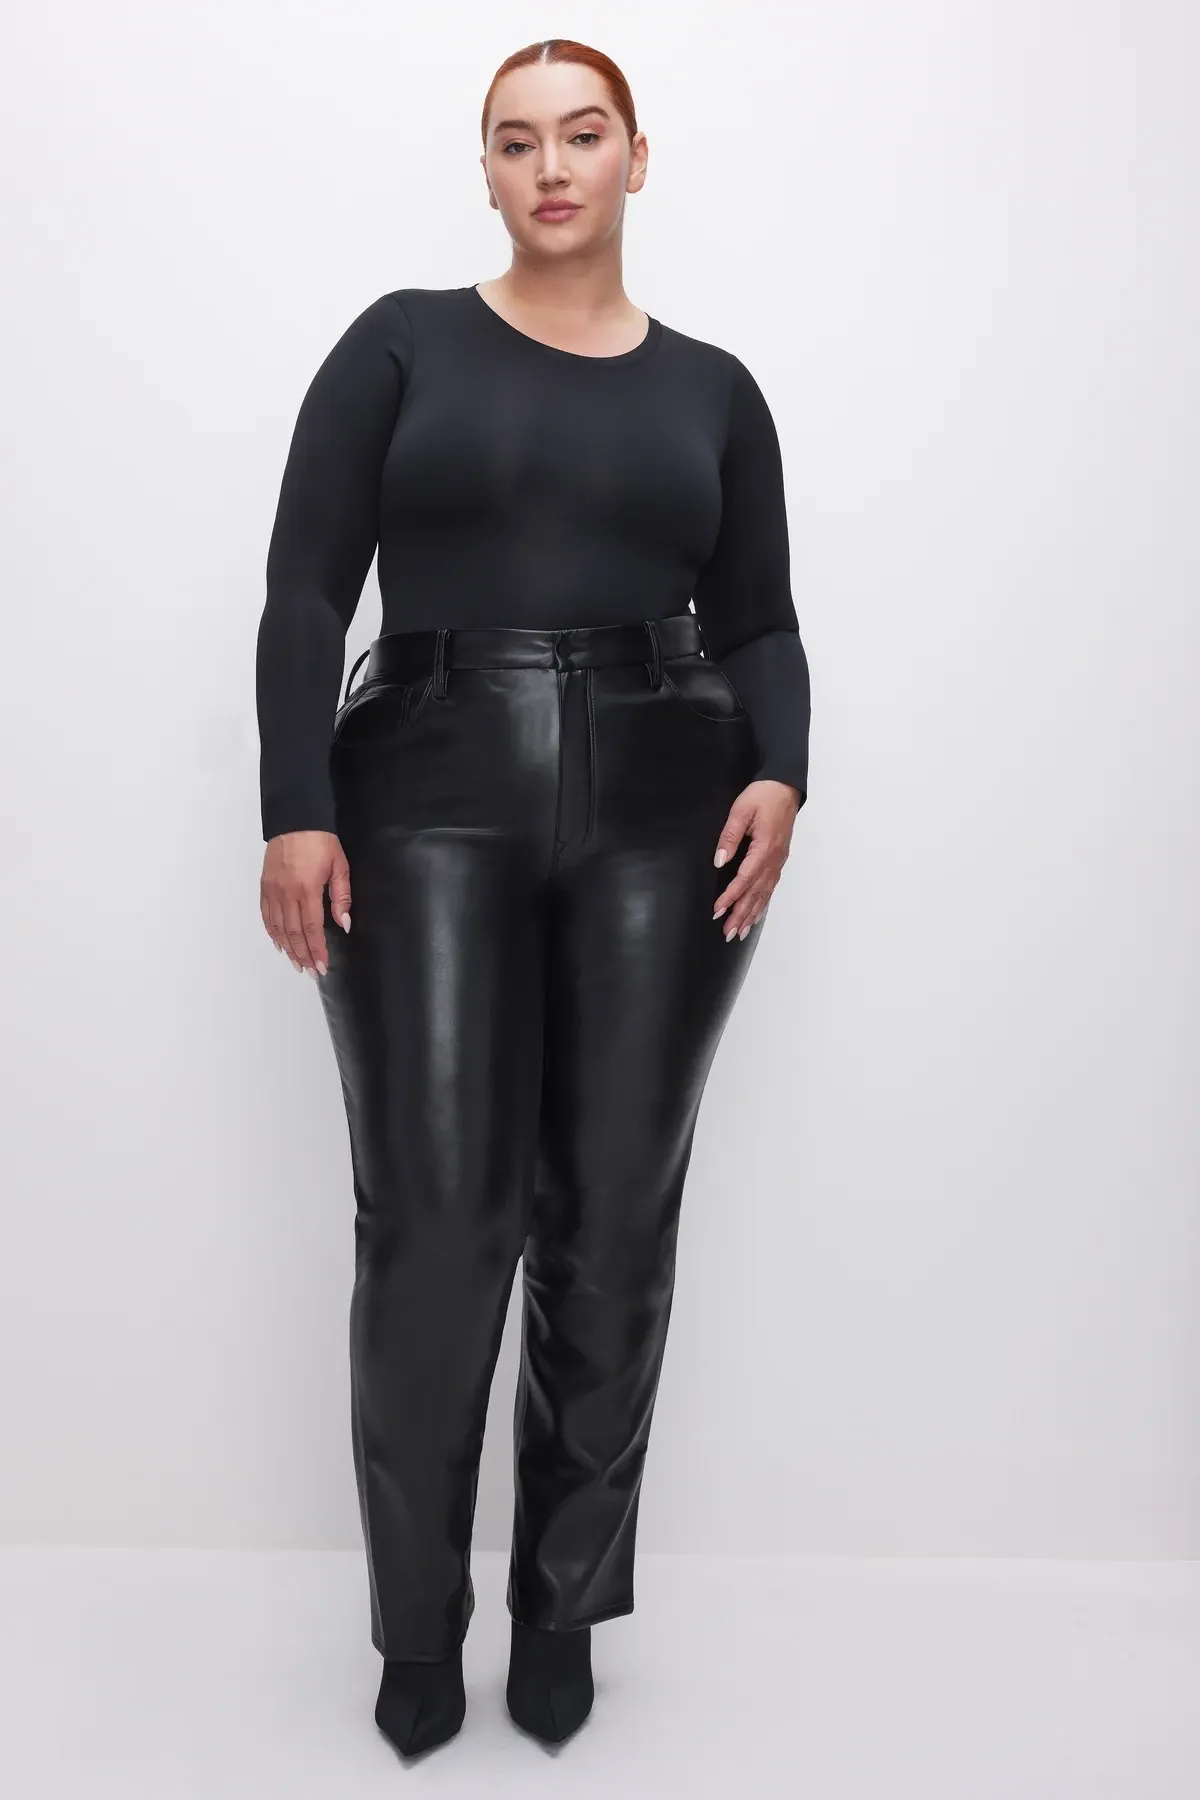 SPANX - Faux Leather for summer? Groundbreaking